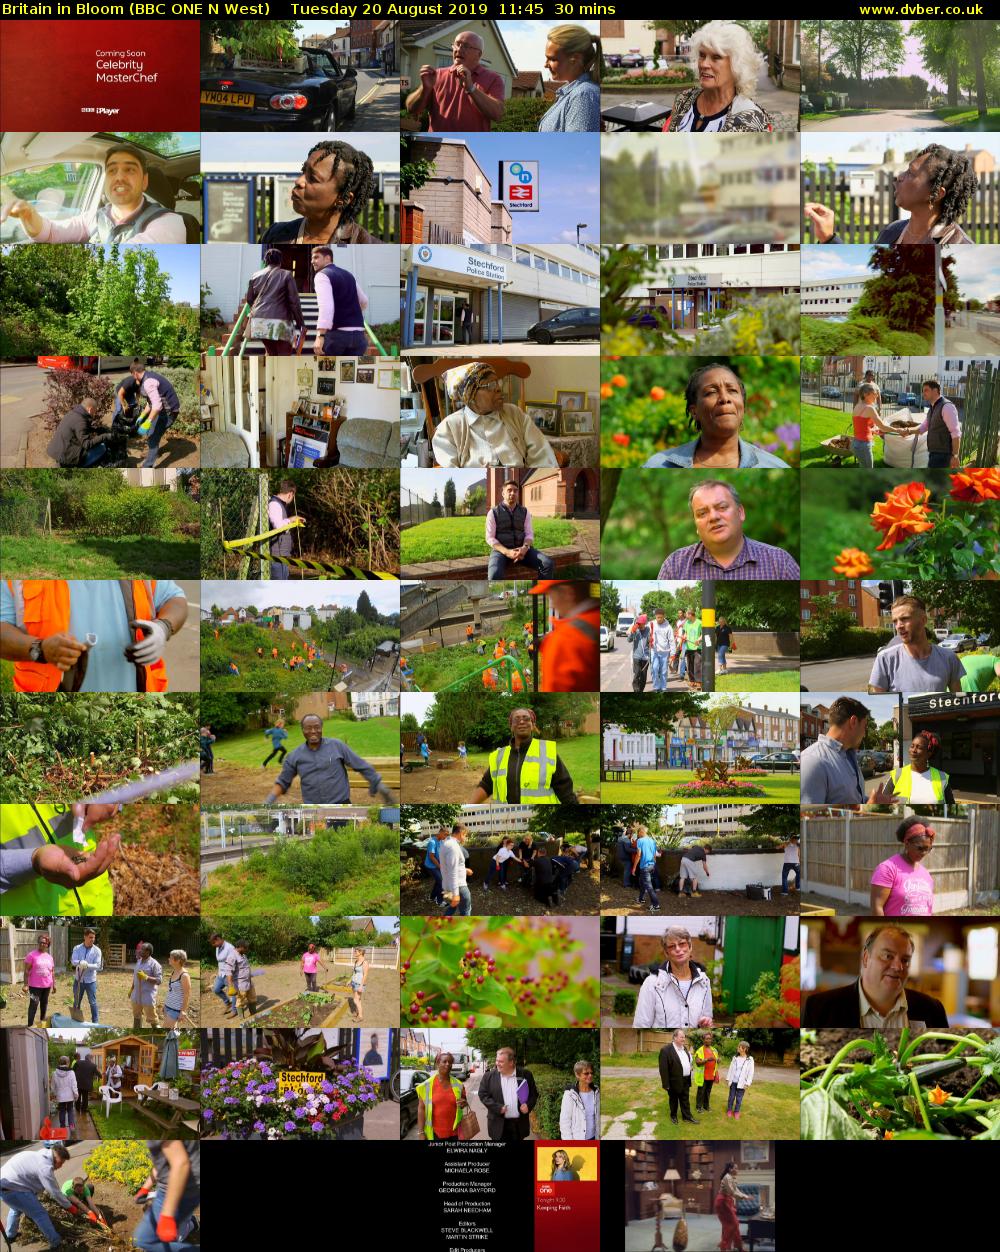 Britain in Bloom (BBC ONE N West) Tuesday 20 August 2019 11:45 - 12:15